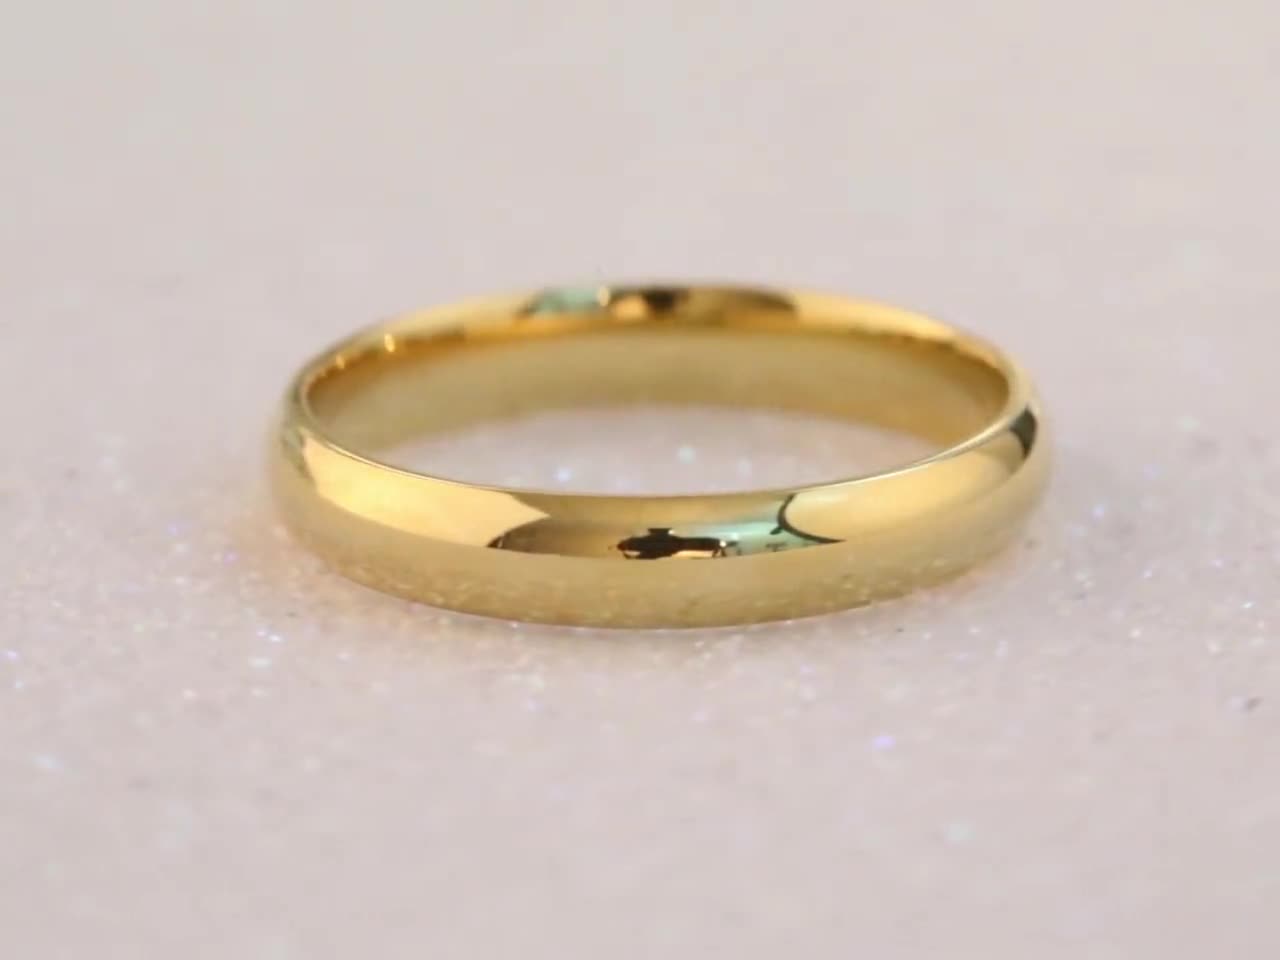 14k Yellow Gold Band (4mm) / Classic Dome / Polished / Comfort Fit / Men's  Women's Wedding Ring / Simple Plain Band